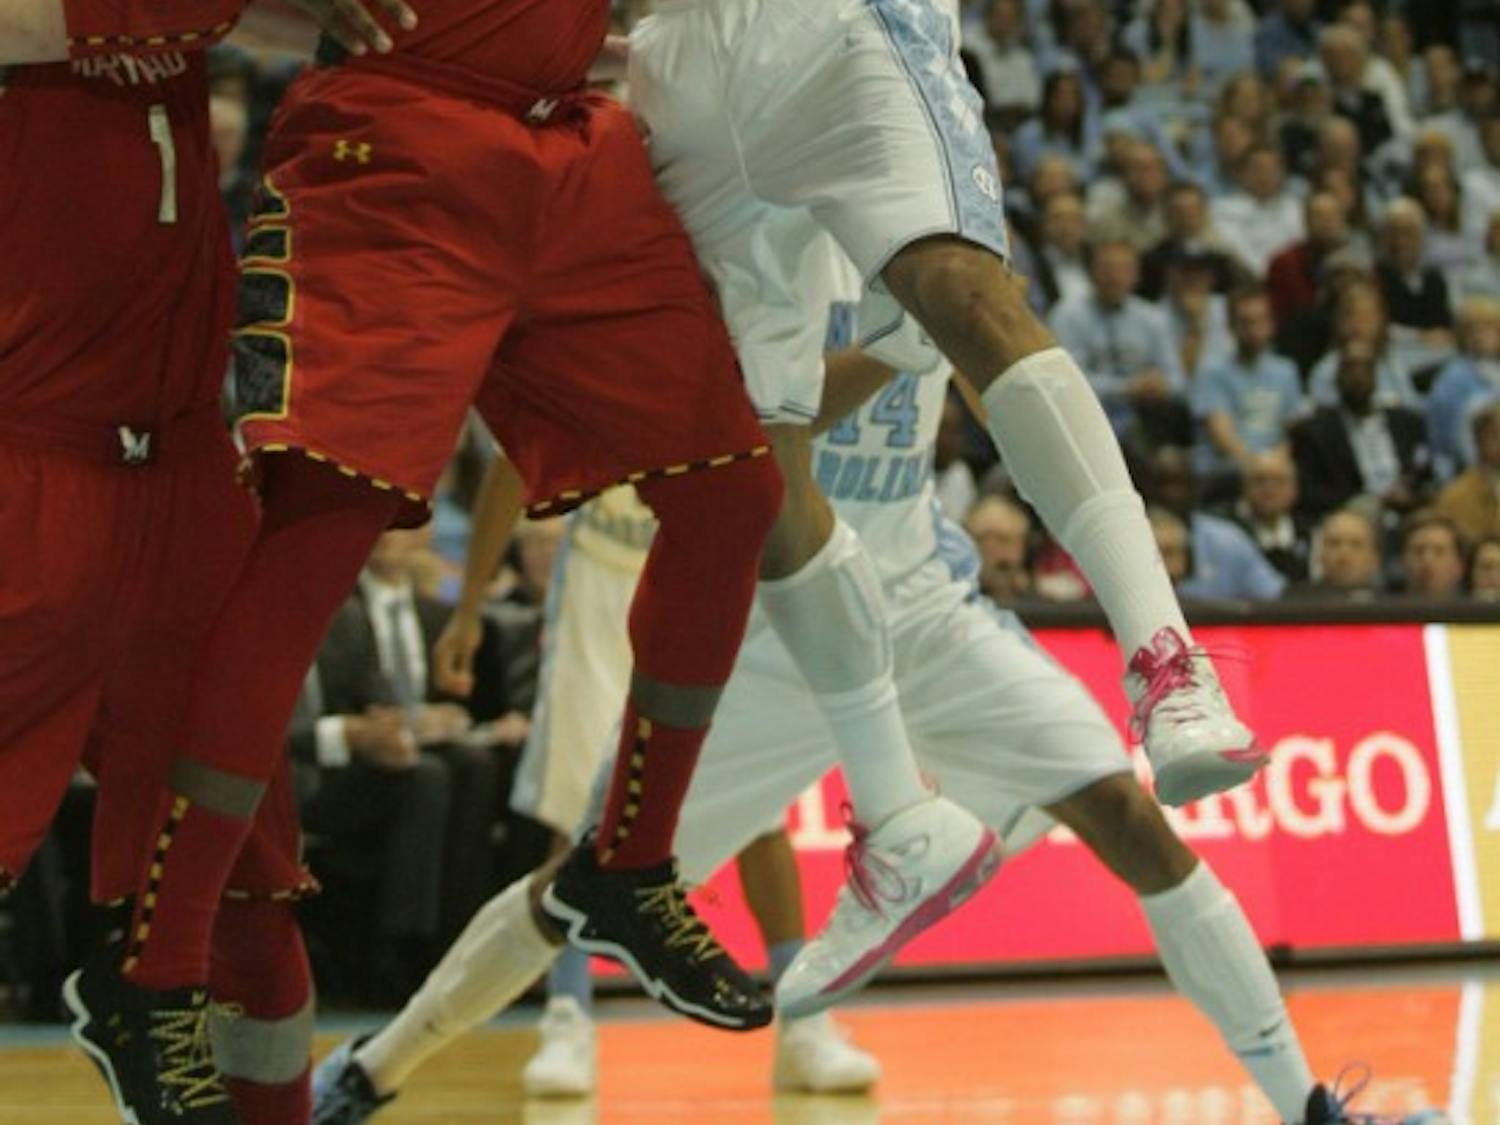 UNC defeated Maryland 75-63 in their last ACC meeting in Chapel hill, N.C. 